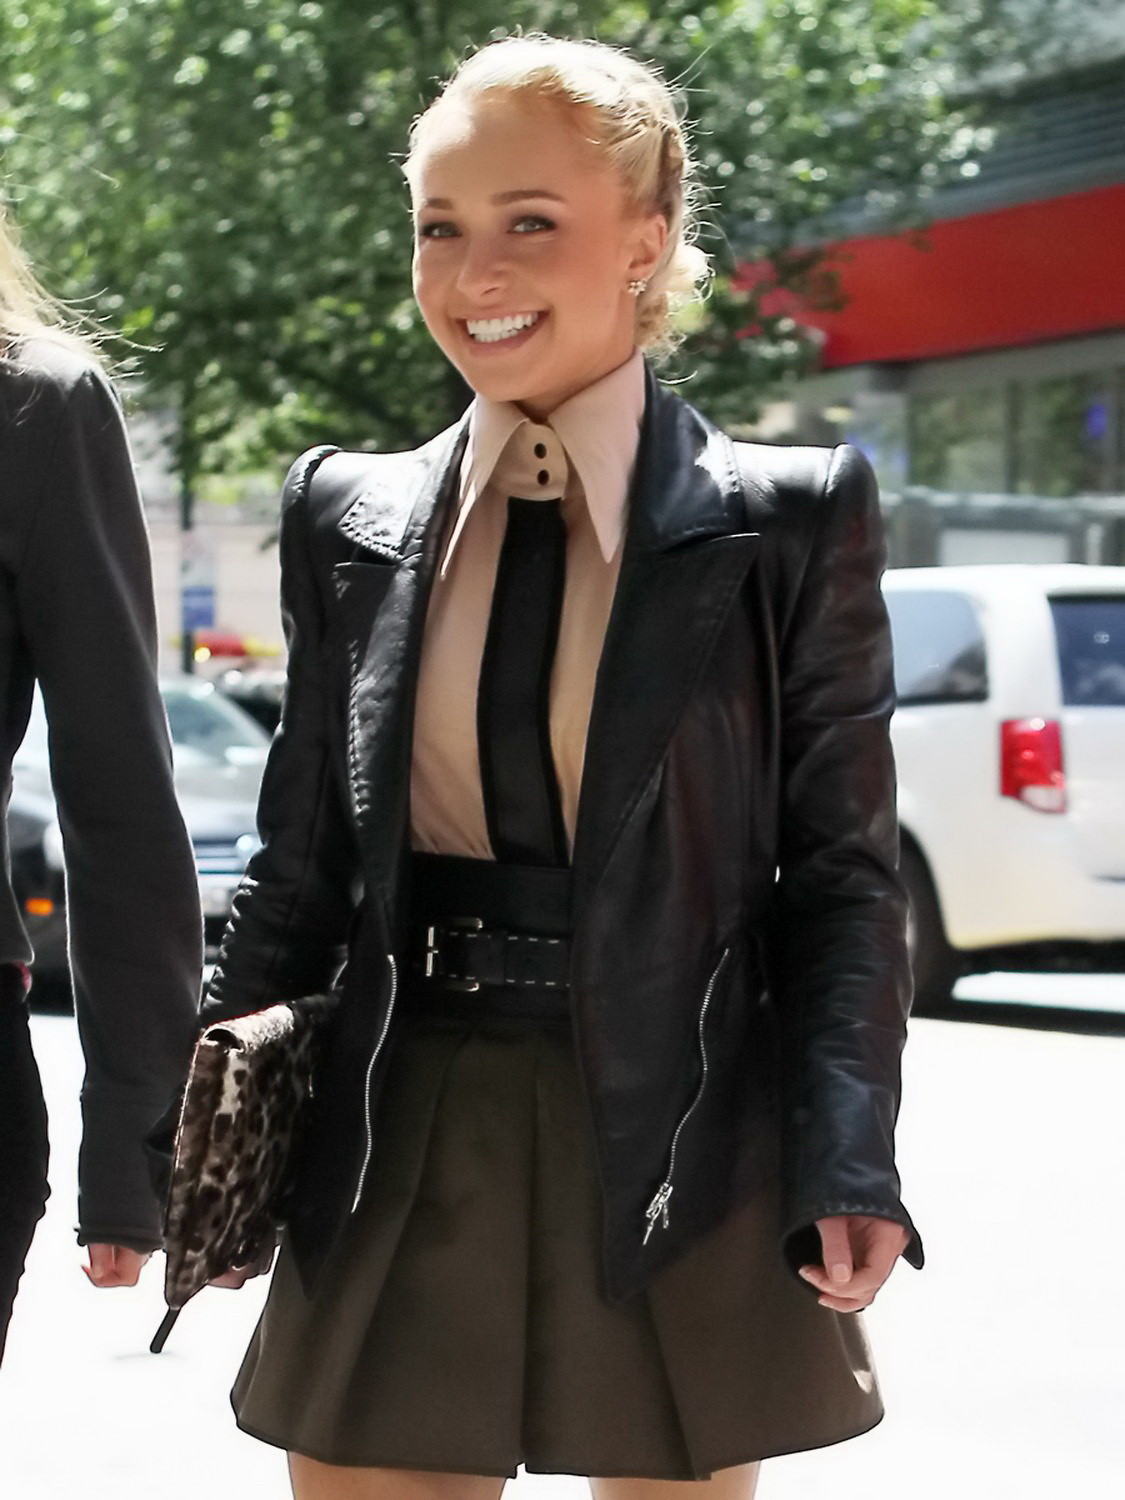 Hayden Panettiere leggy wearing a mini skirt leaving a hotel in NYC #75262799